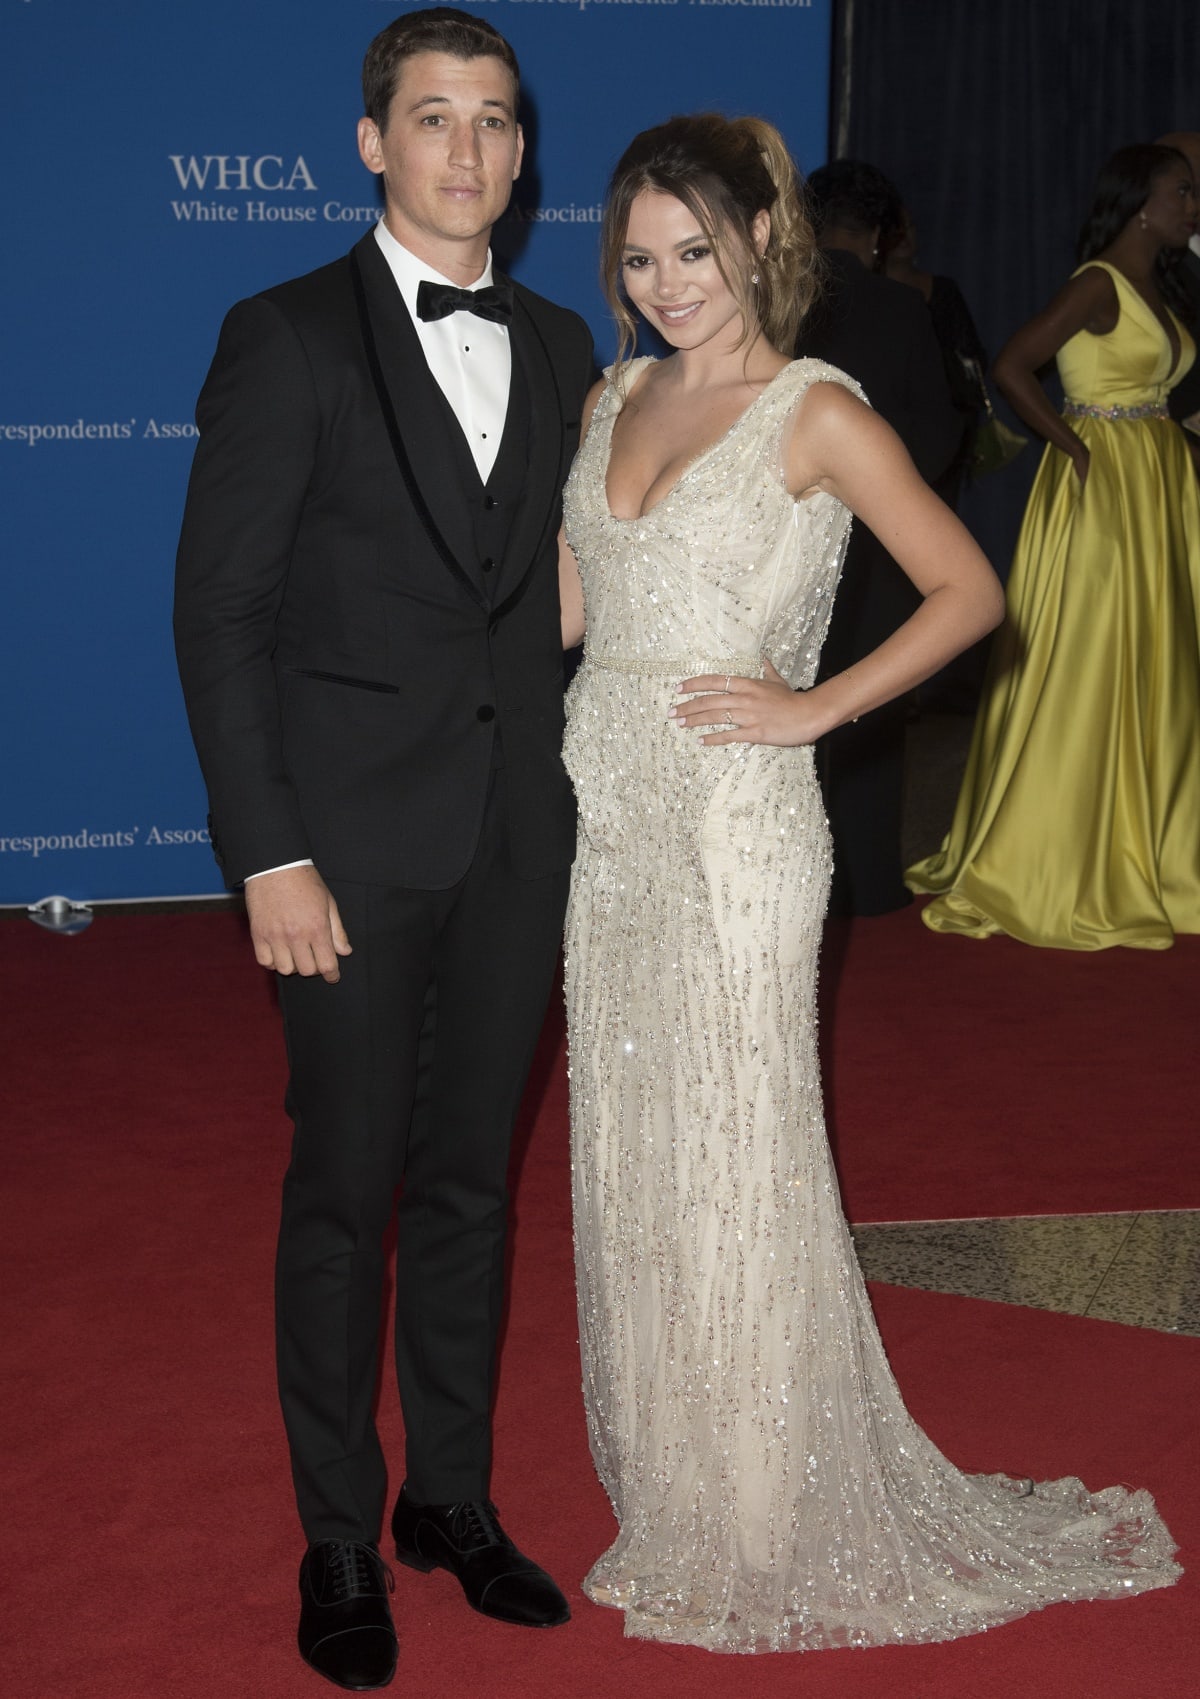 Miles Teller and Keleigh Sperry attending the 2016 White House 102nd Correspondents’ Association Dinner